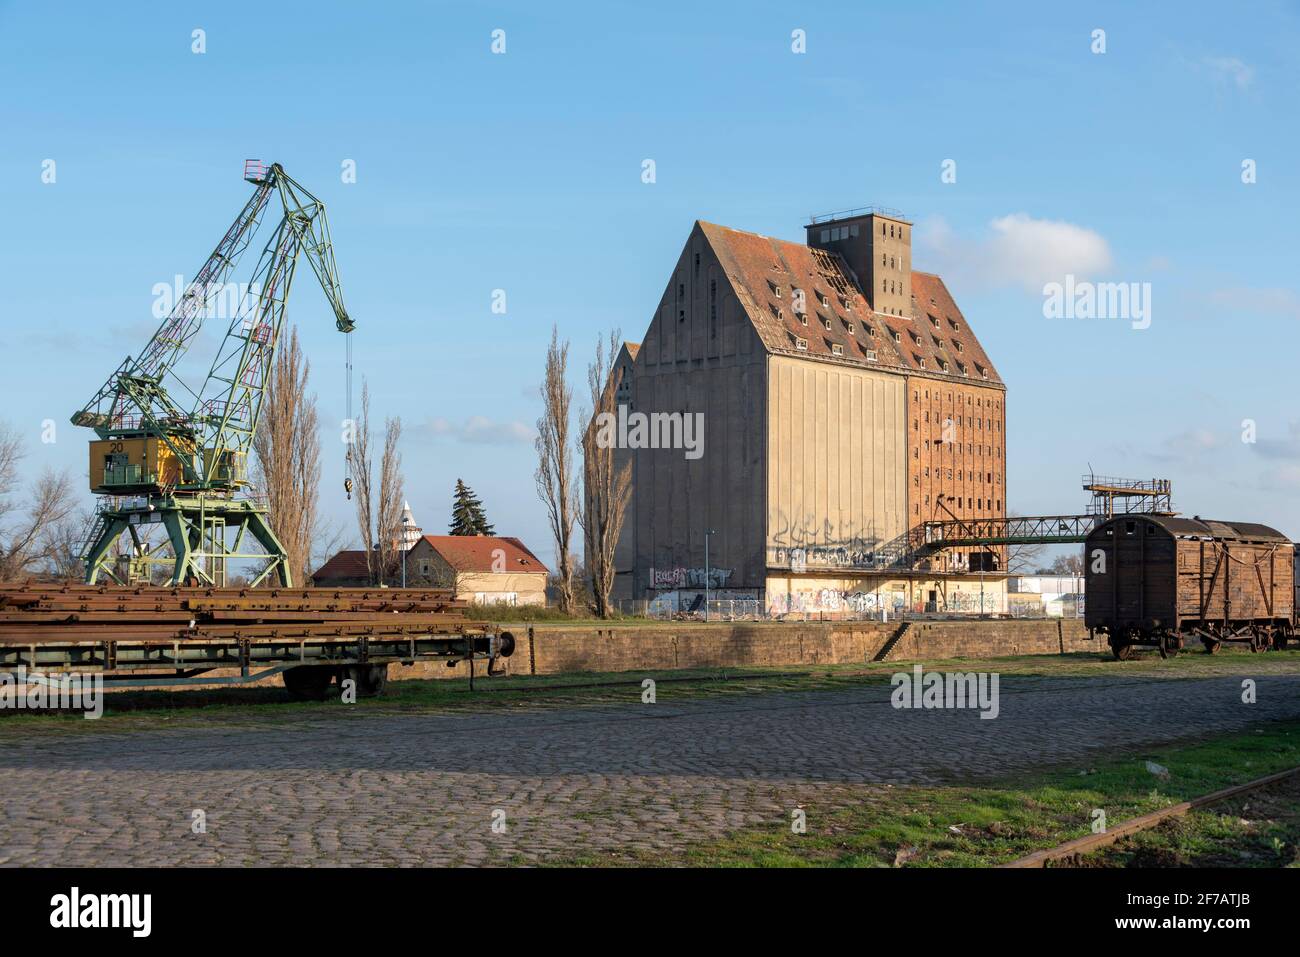 Germany, Saxony-Anhalt, Magdeburg, old commercial harbour with harbour crane, silo, passenger train. Stock Photo